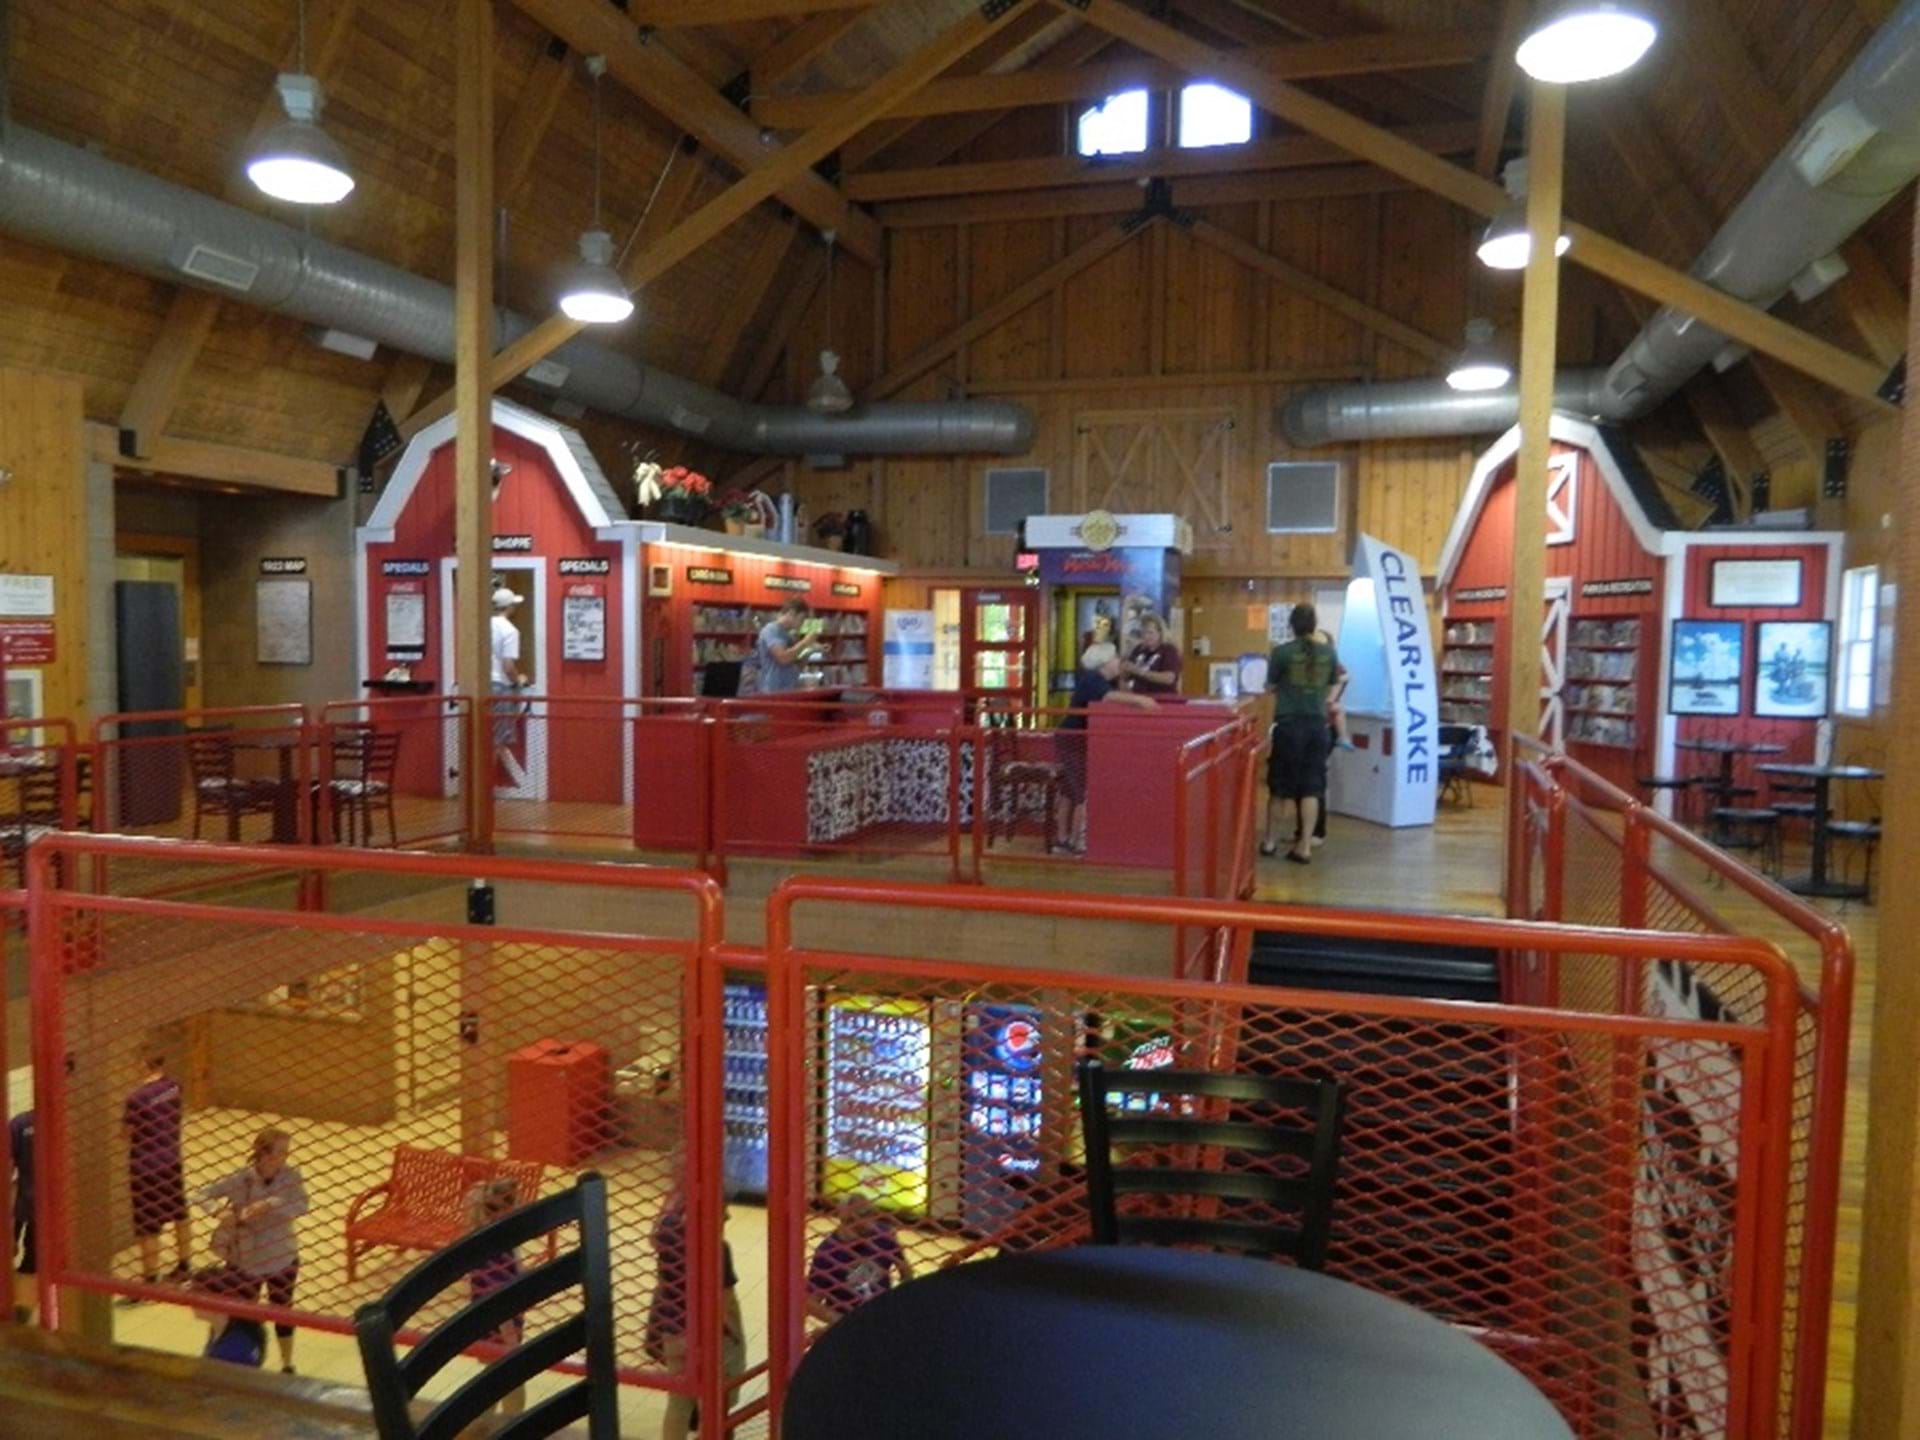 Vending and restrooms on main floor, welcome center and Barn Boutique upstairs